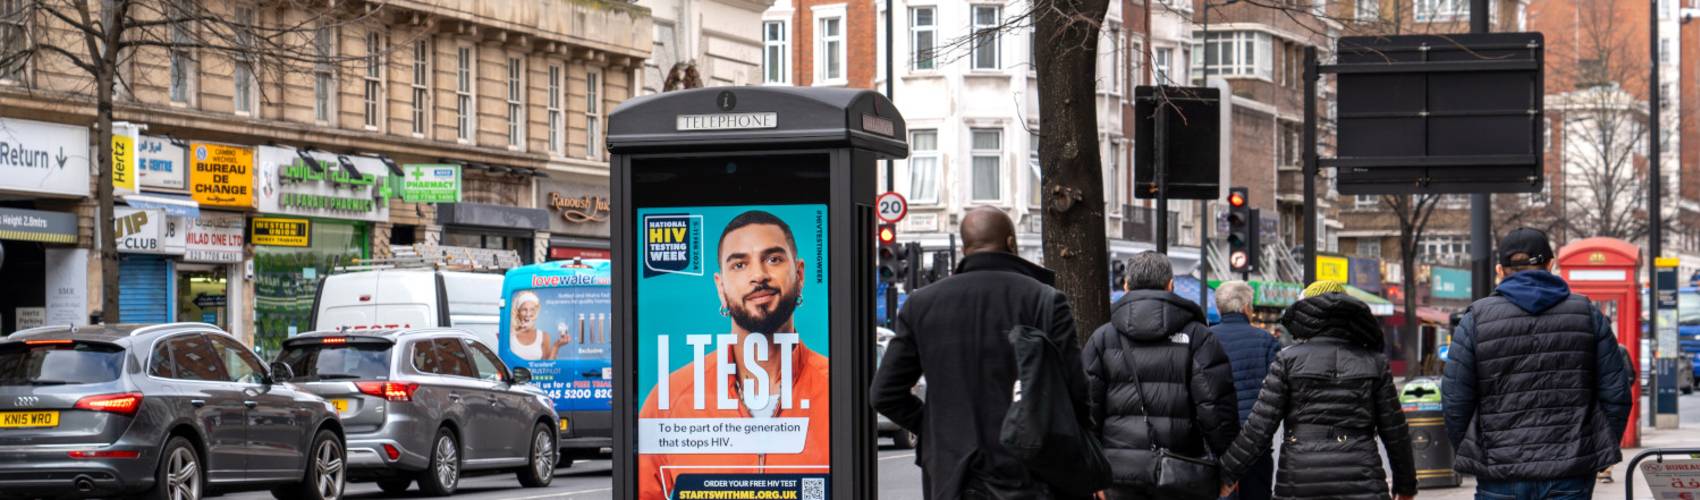 An 'I Test' campaign displaying on an Adshel Live screen on a busy high street